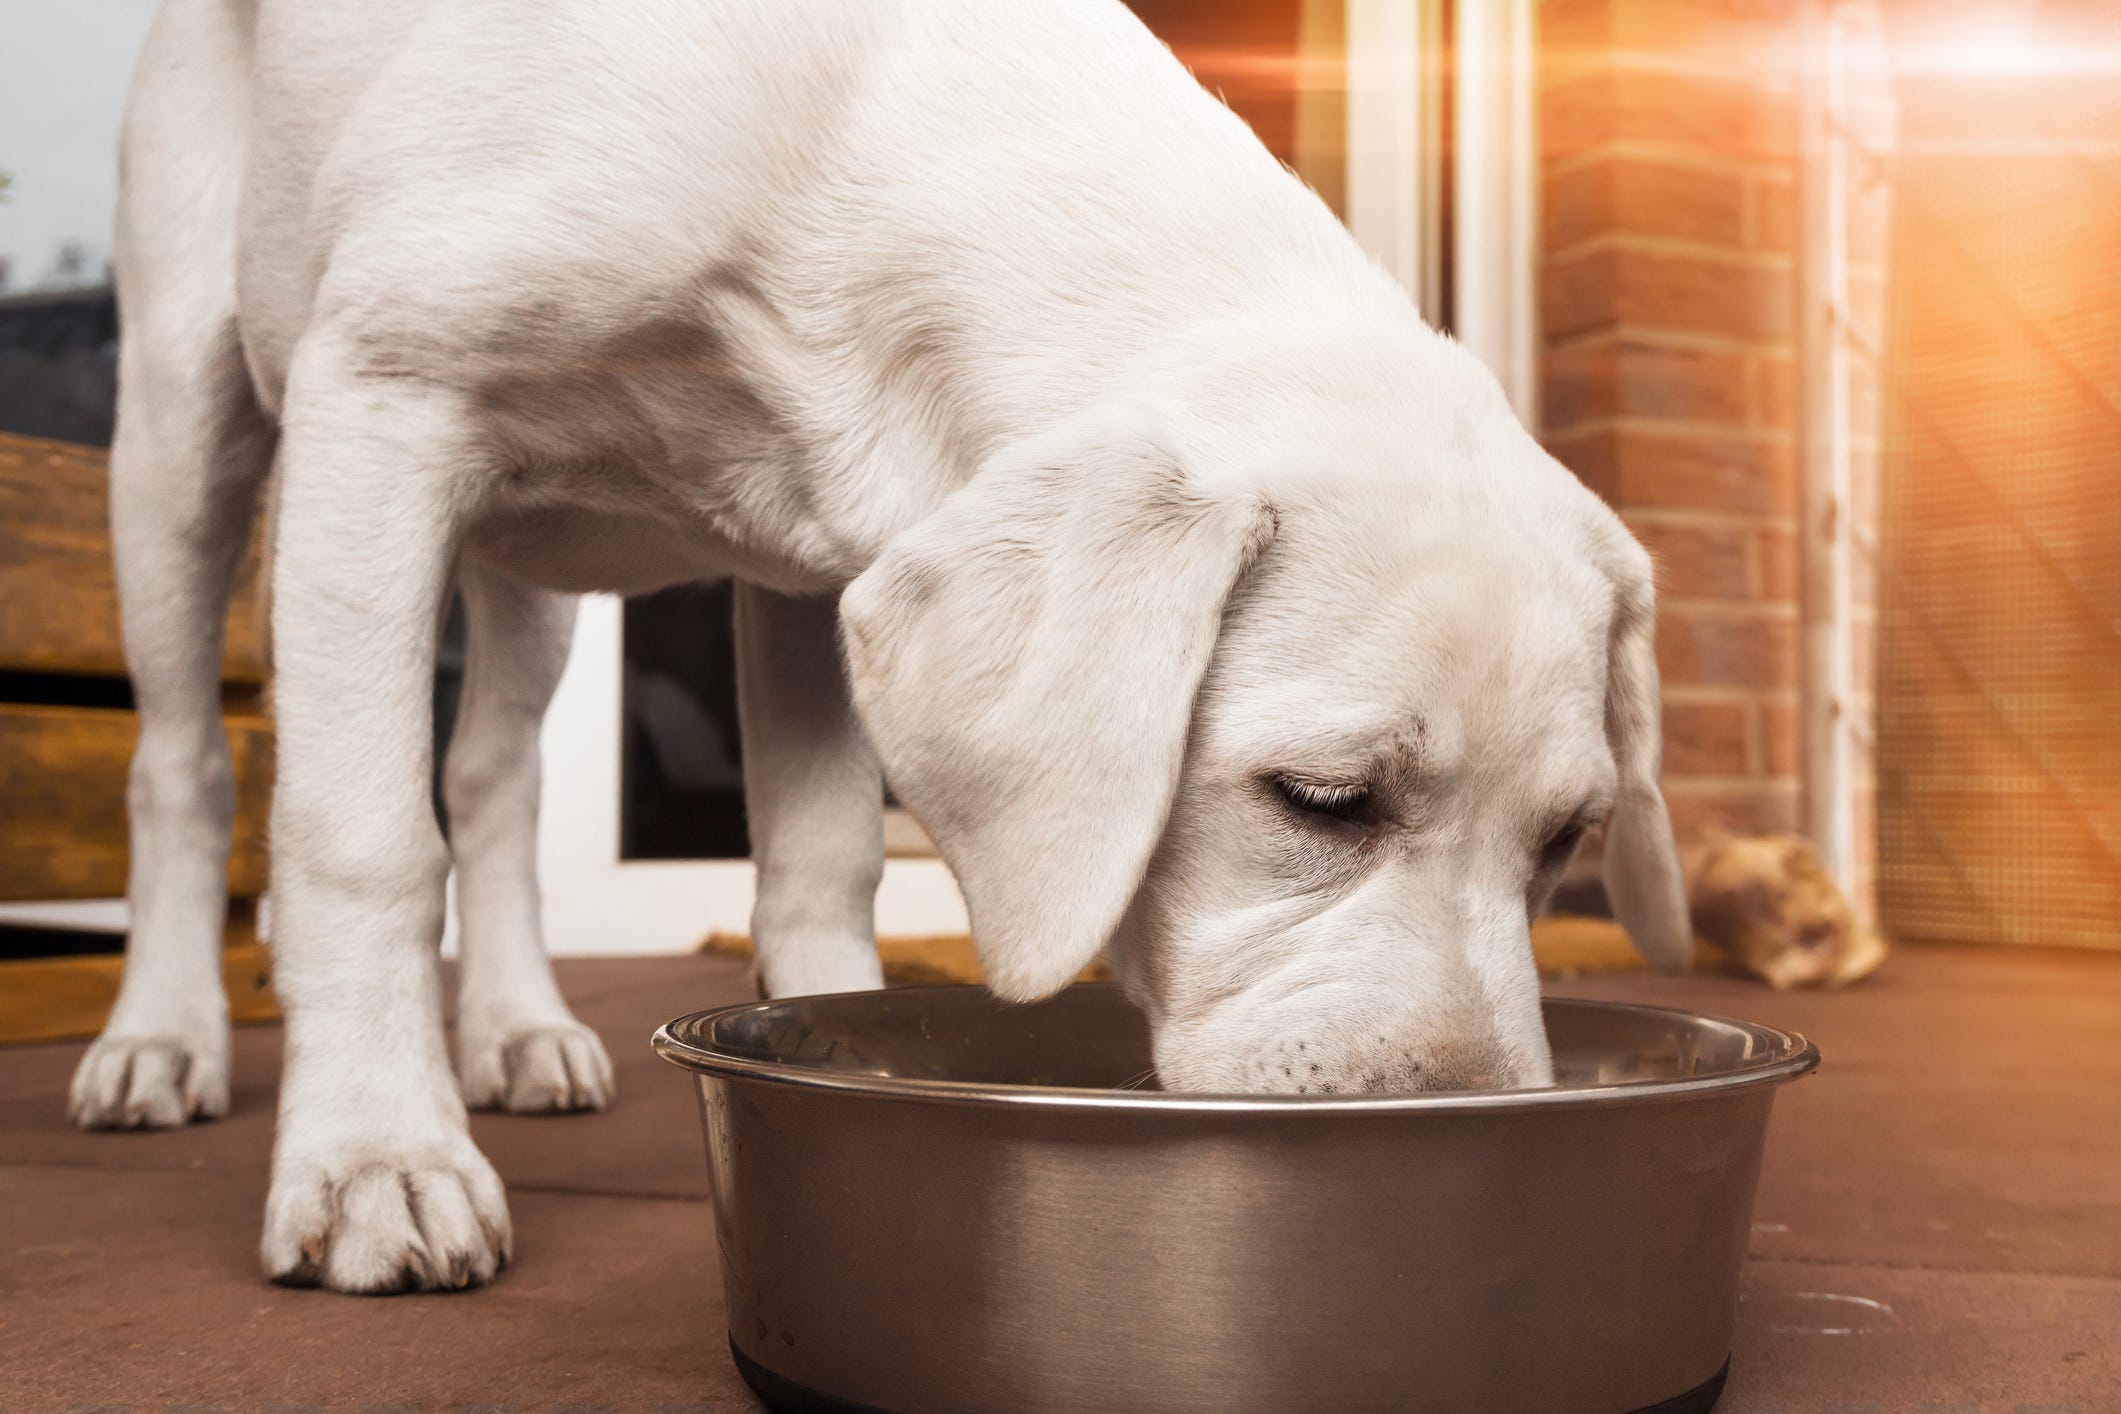 Dog Food Recall More Hills Pet Nutrition Cans Pulled For